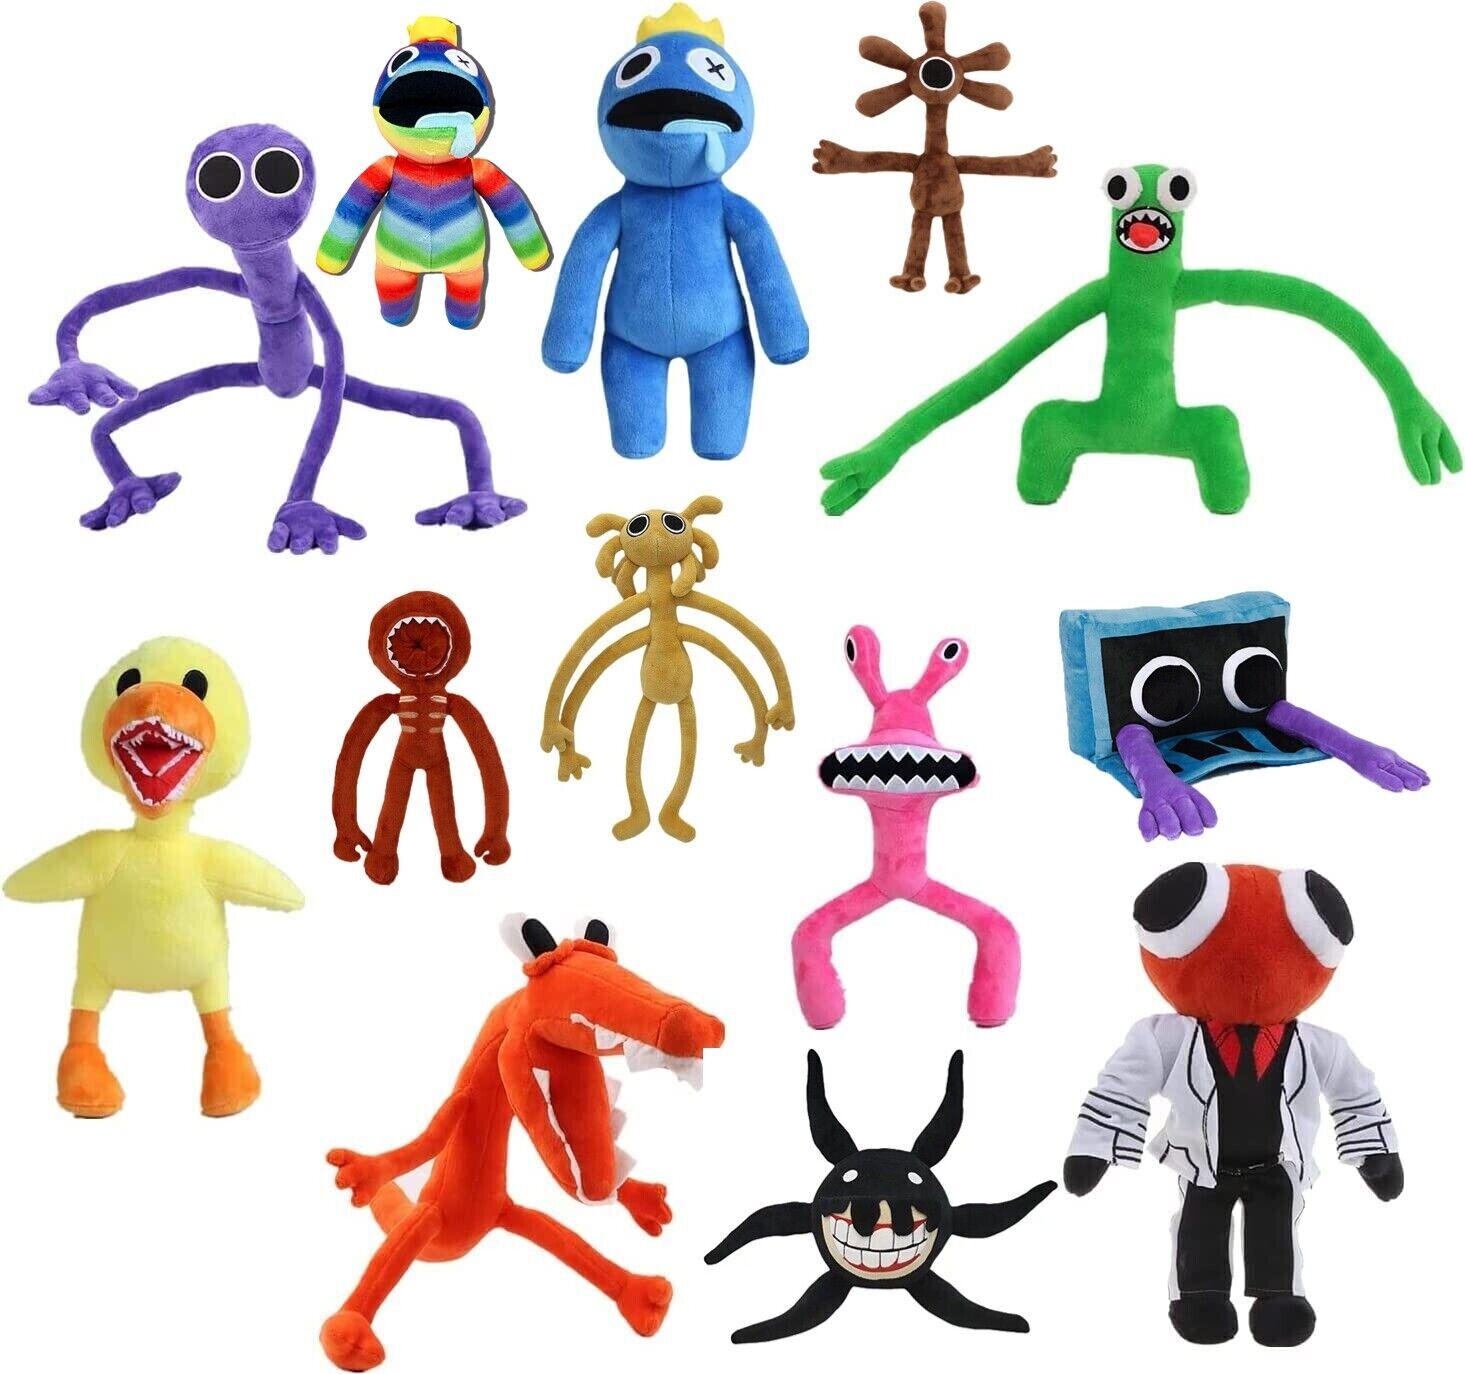 Rainbow Friends game Chapter 2 Plush figures stuffed doll gift for